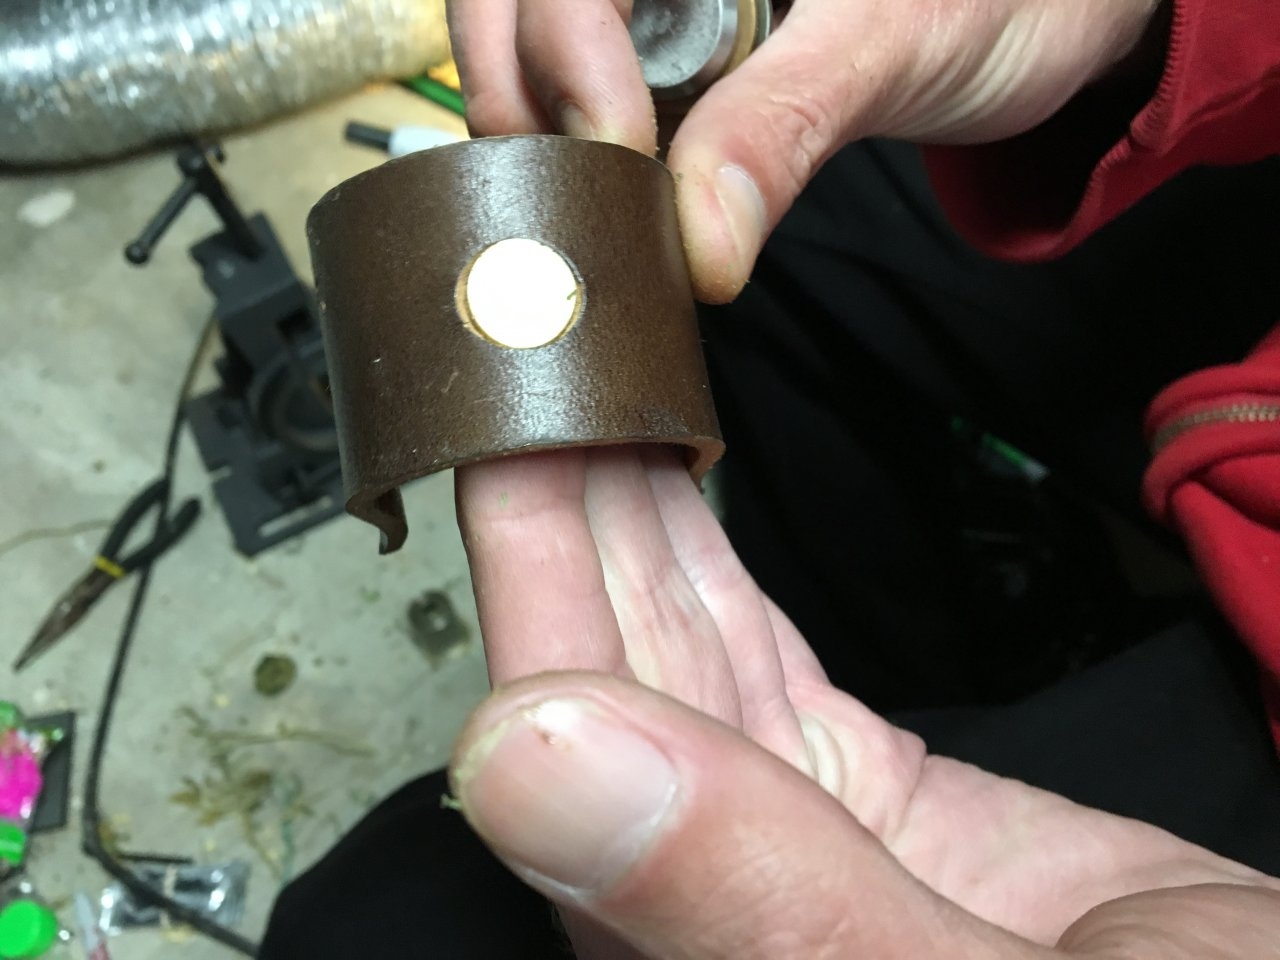 The plug fits into the leather shield for storage.